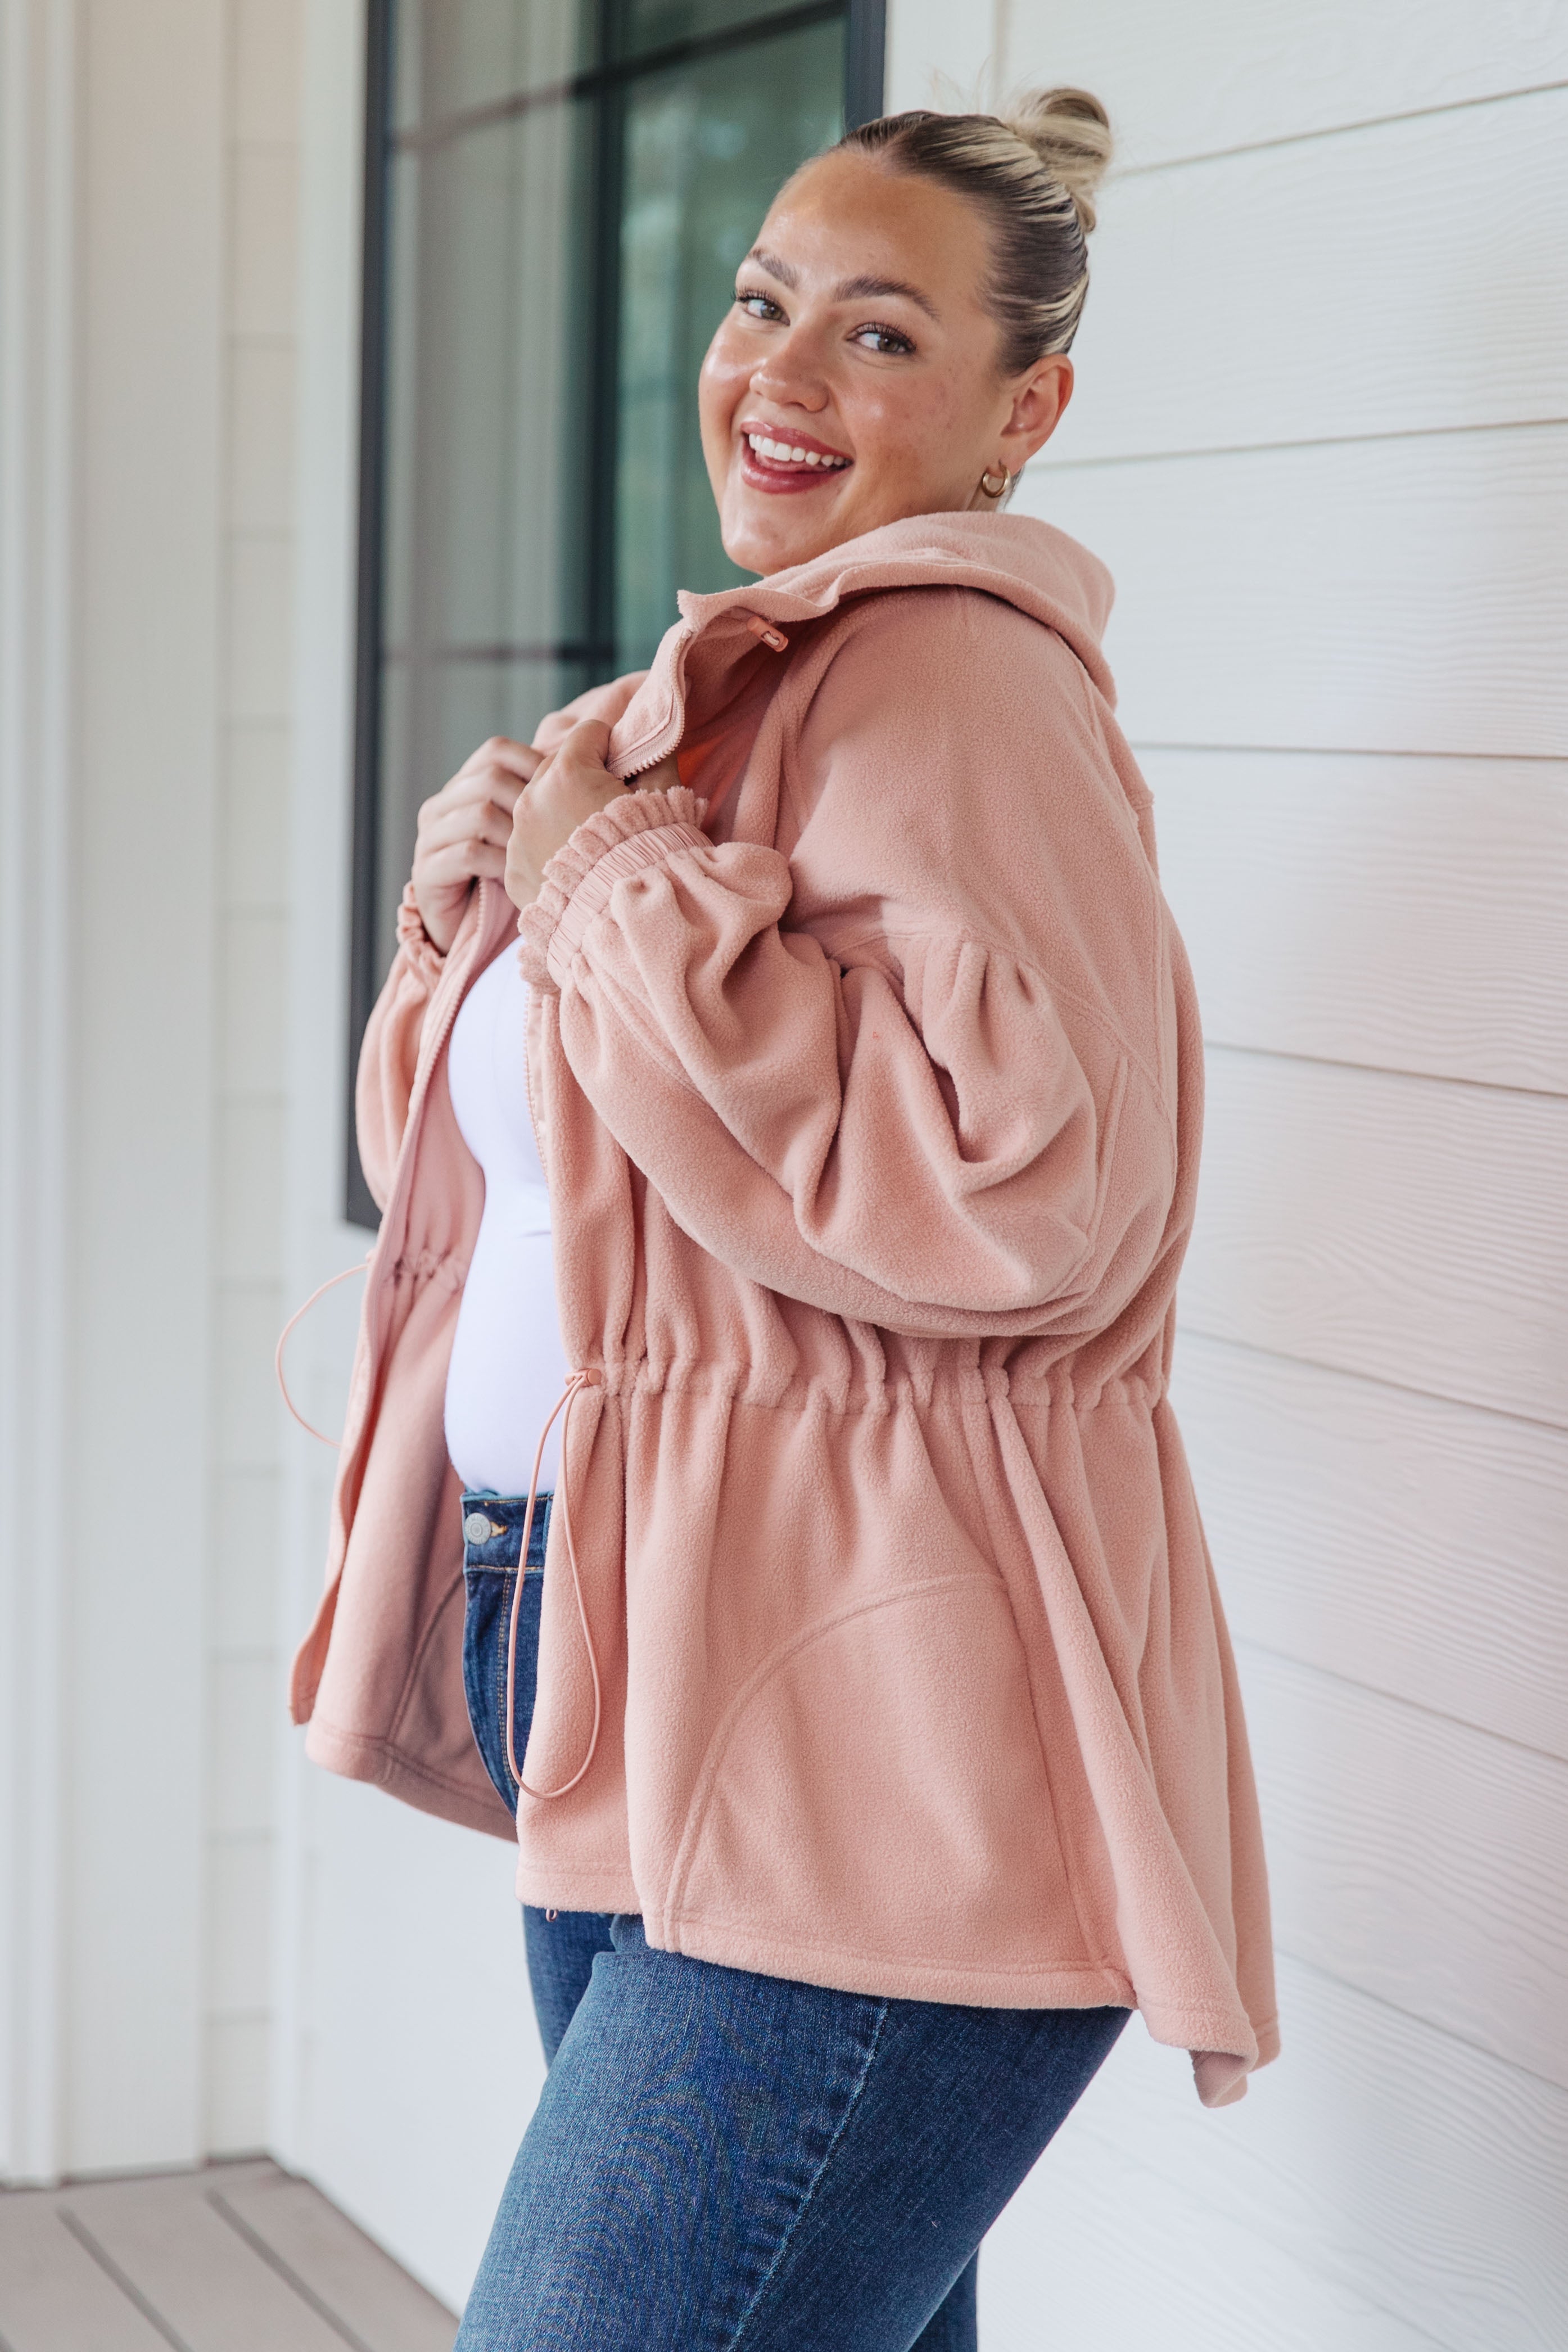 Zipped and Cinched Zip Up Jacket - Lola Cerina Boutique